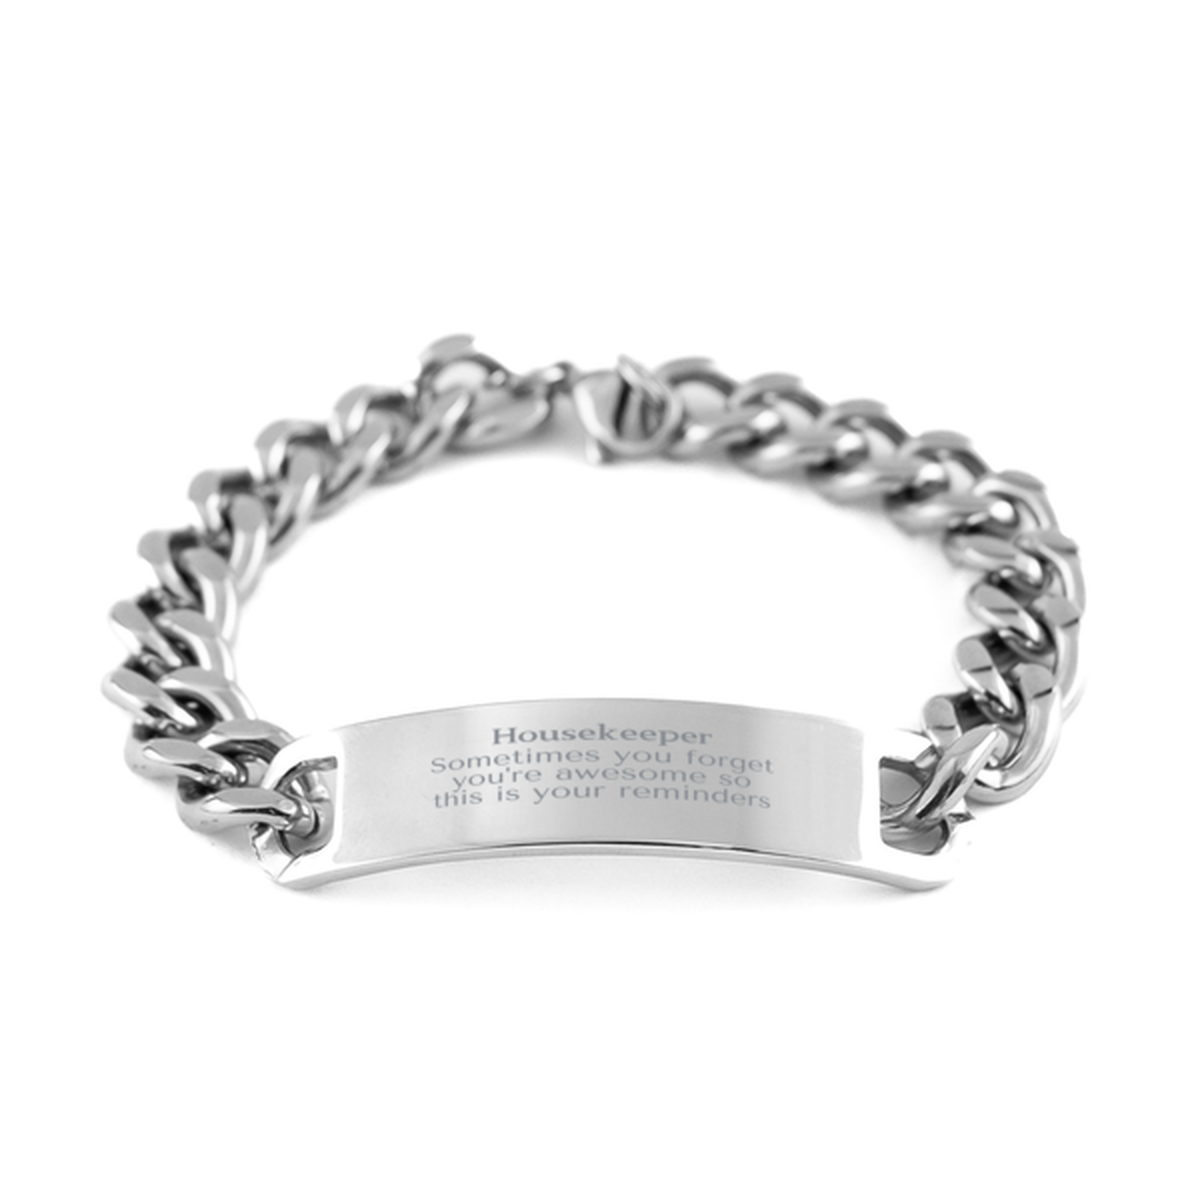 Sentimental Housekeeper Cuban Chain Stainless Steel Bracelet, Housekeeper Sometimes you forget you're awesome so this is your reminders, Graduation Christmas Birthday Gifts for Housekeeper, Men, Women, Coworkers